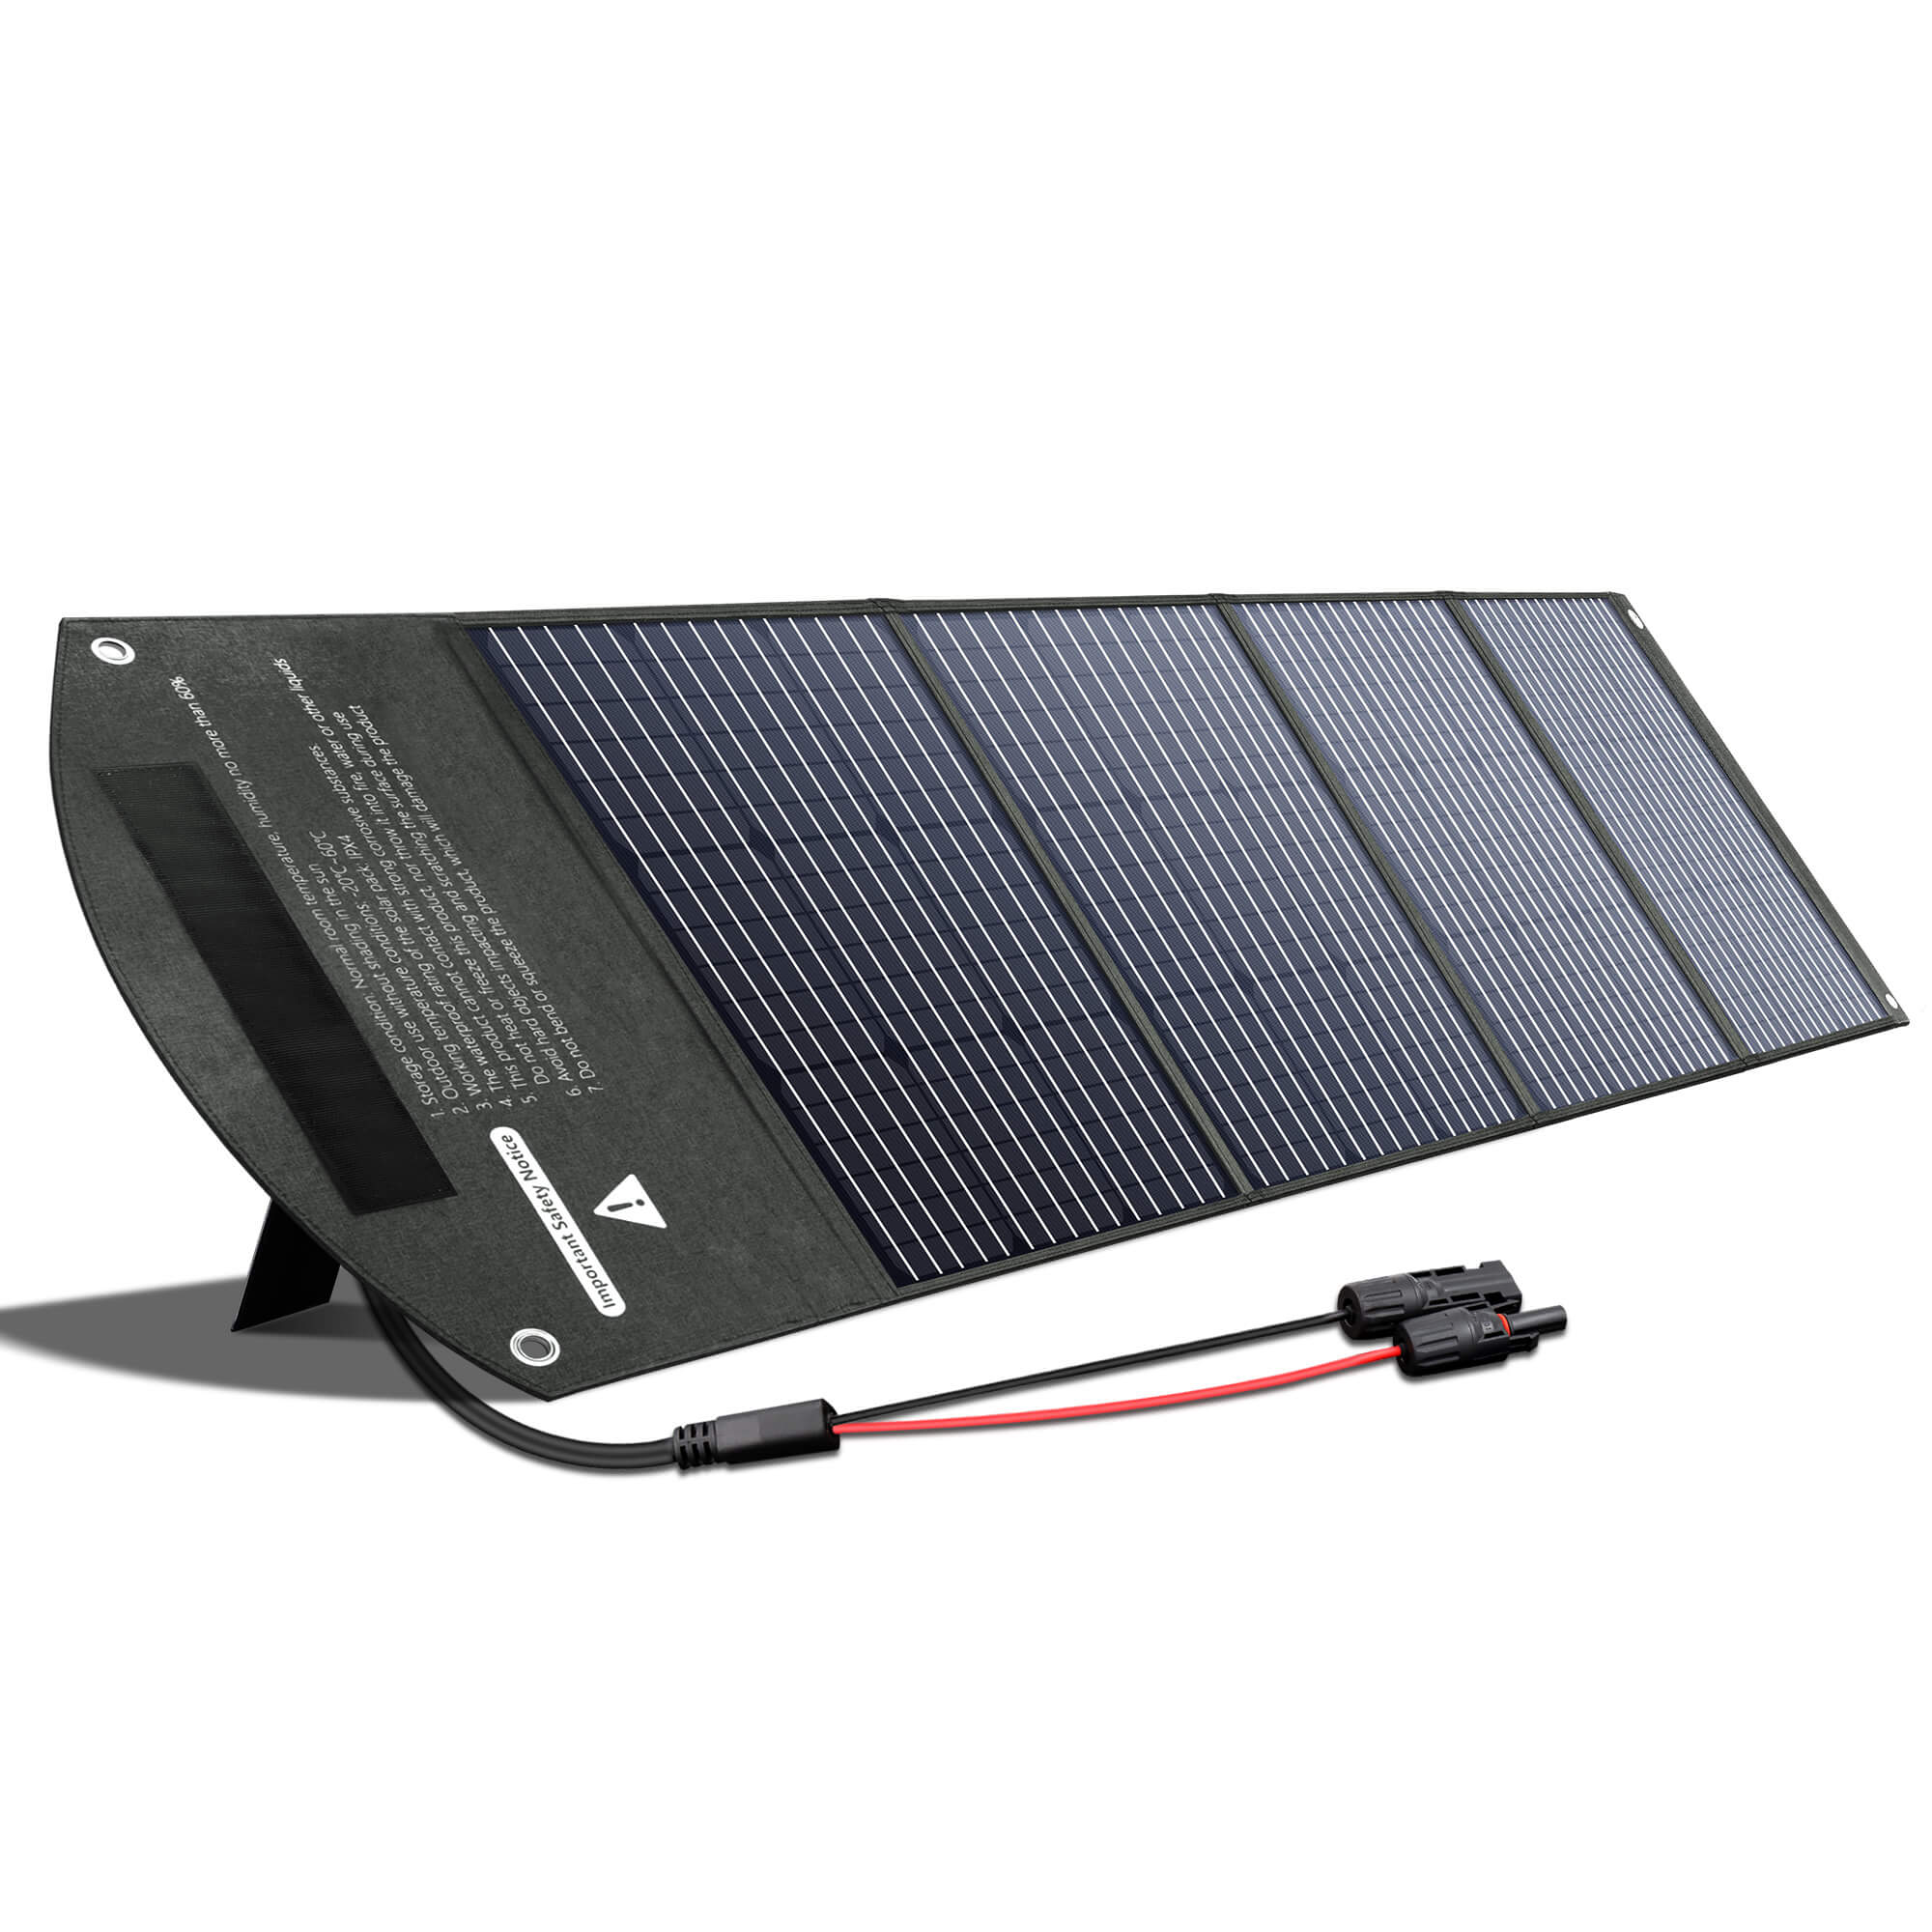 160W 18V Foldable Monocrystalline Solar Panel for RV, Camping from